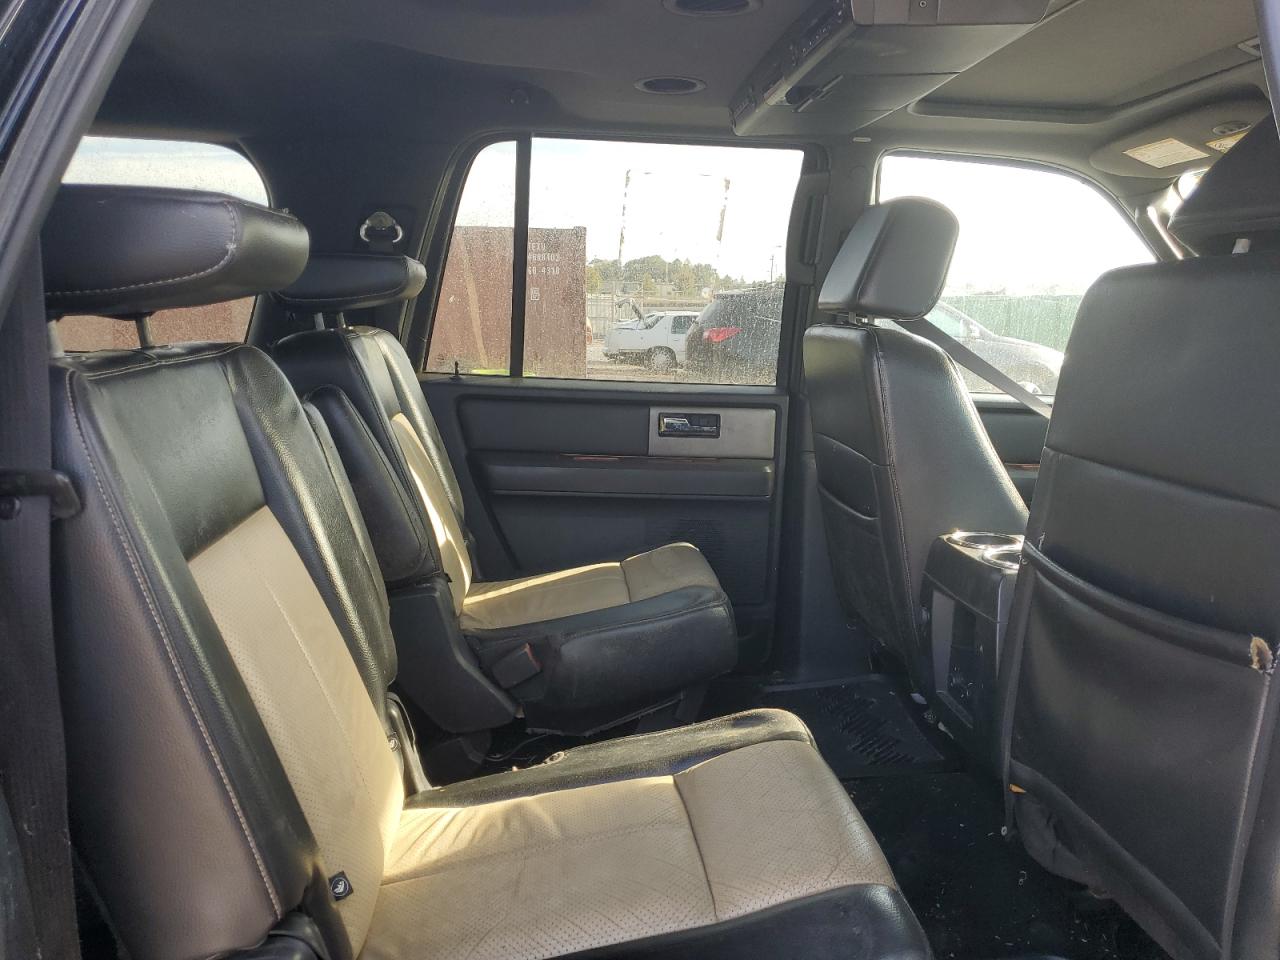 1FMFK17587L****** Salvage 2007 Ford Expedition in Alabama State